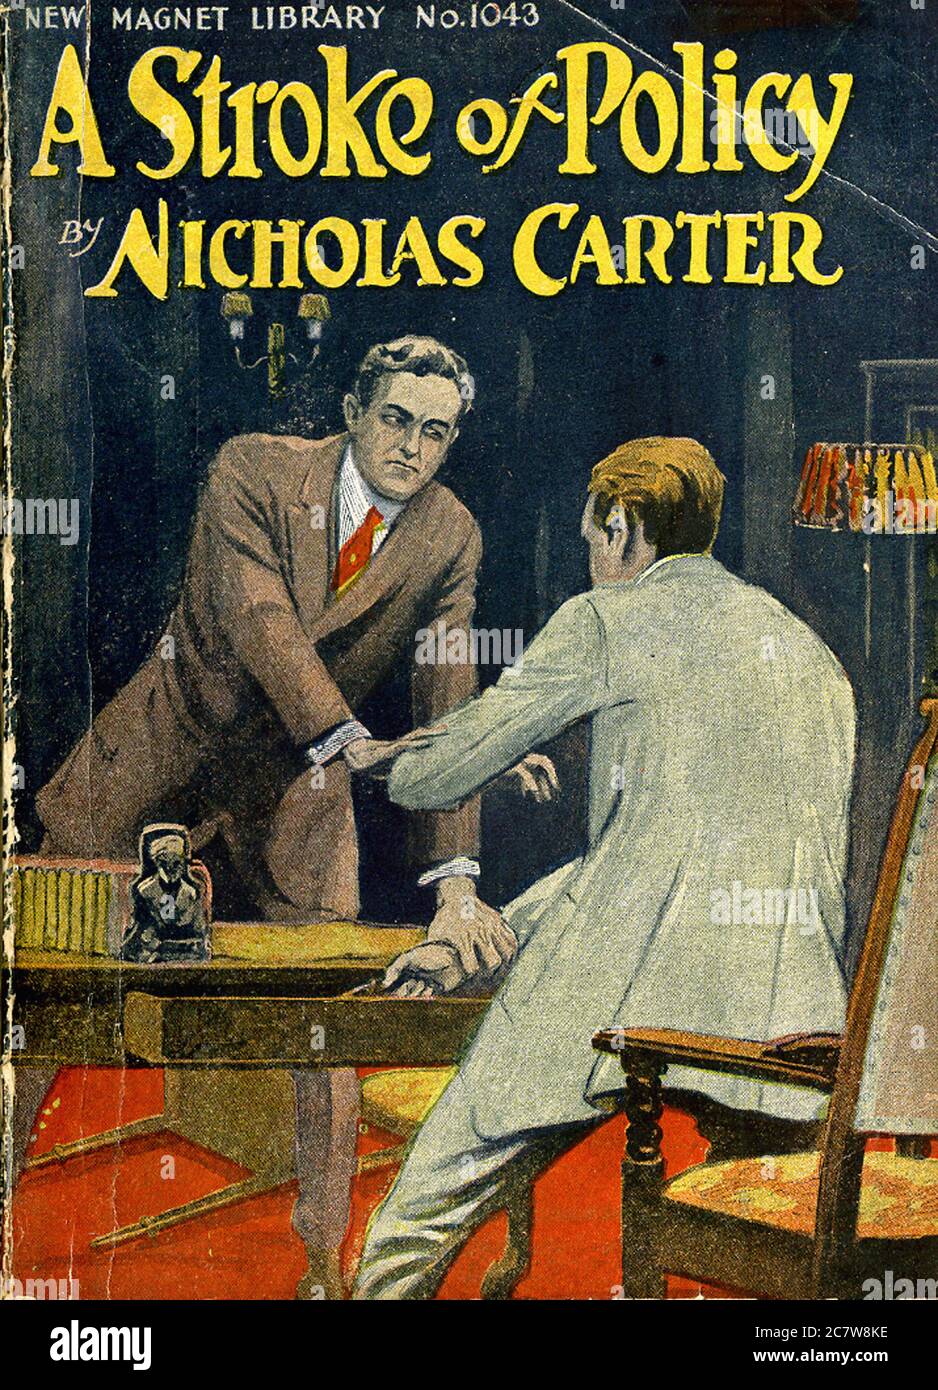 Nicholas Carter - A Stroke of Policy - New Magnet Library - Vintage Pulp Literary Stock Photo